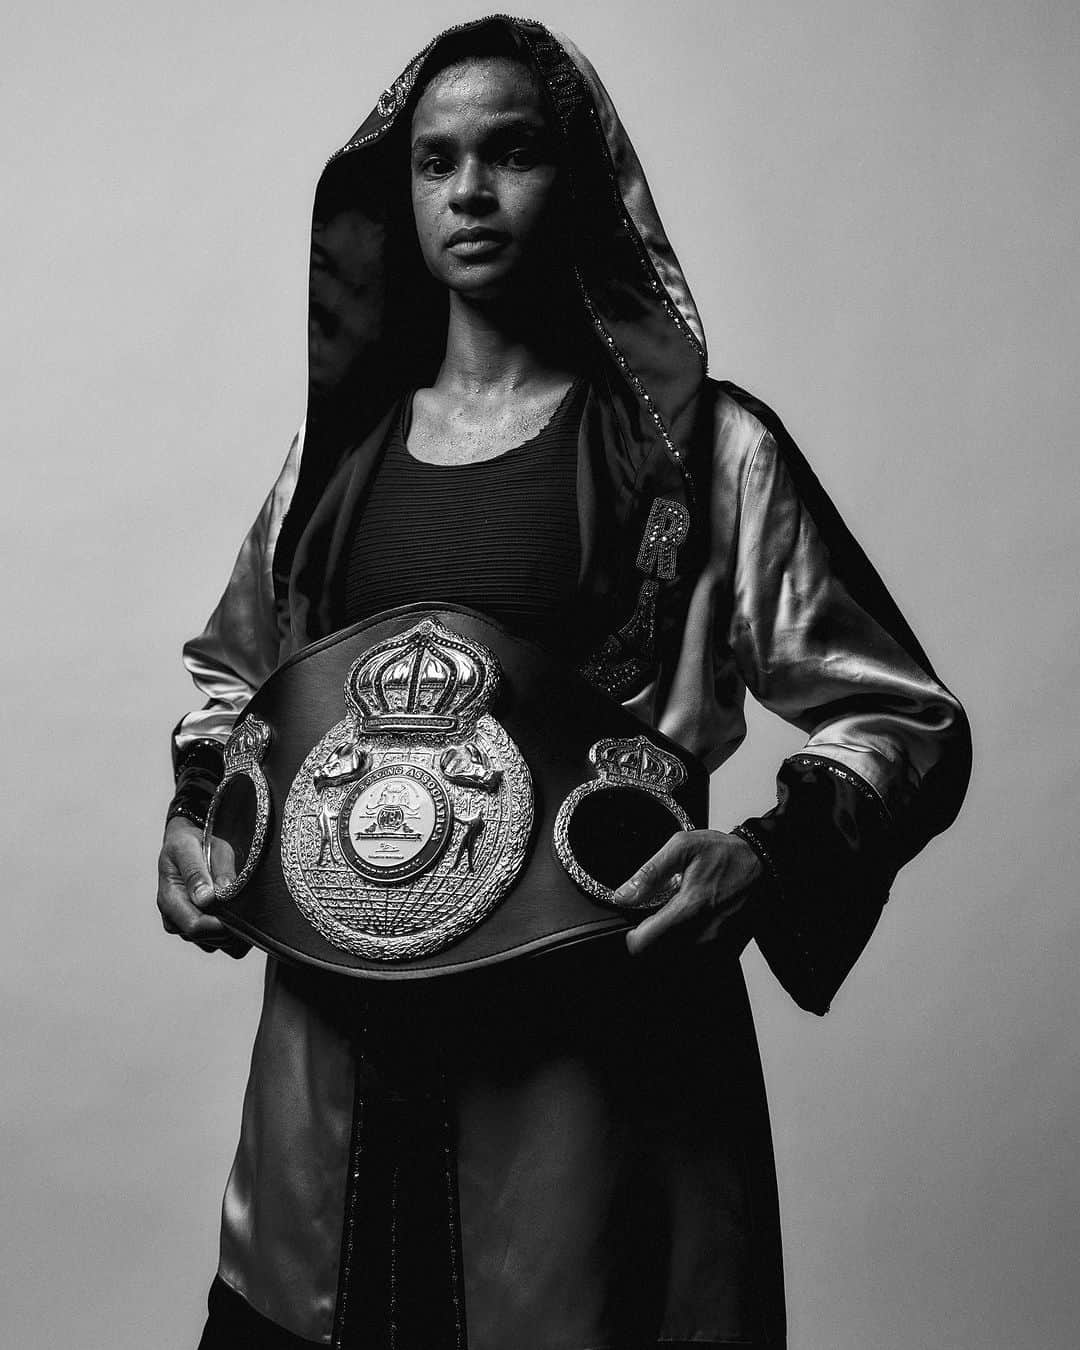 ELLE UKのインスタグラム：「ELLE UK had a front row seat to one of the most important fights of boxing champion #RamlaAli’s career, one that would allow her to reclaim the WBA intercontinental title. Her performance was slick and powerful, and wearing a custom @Dior kit designed by #MariaGraziaChiuri, Ali brought style into the ring.  At the link in our bio, the Somali-British boxer shares an exclusive photo diary leading up to her victorious moment.  Photography by @tomcockram」